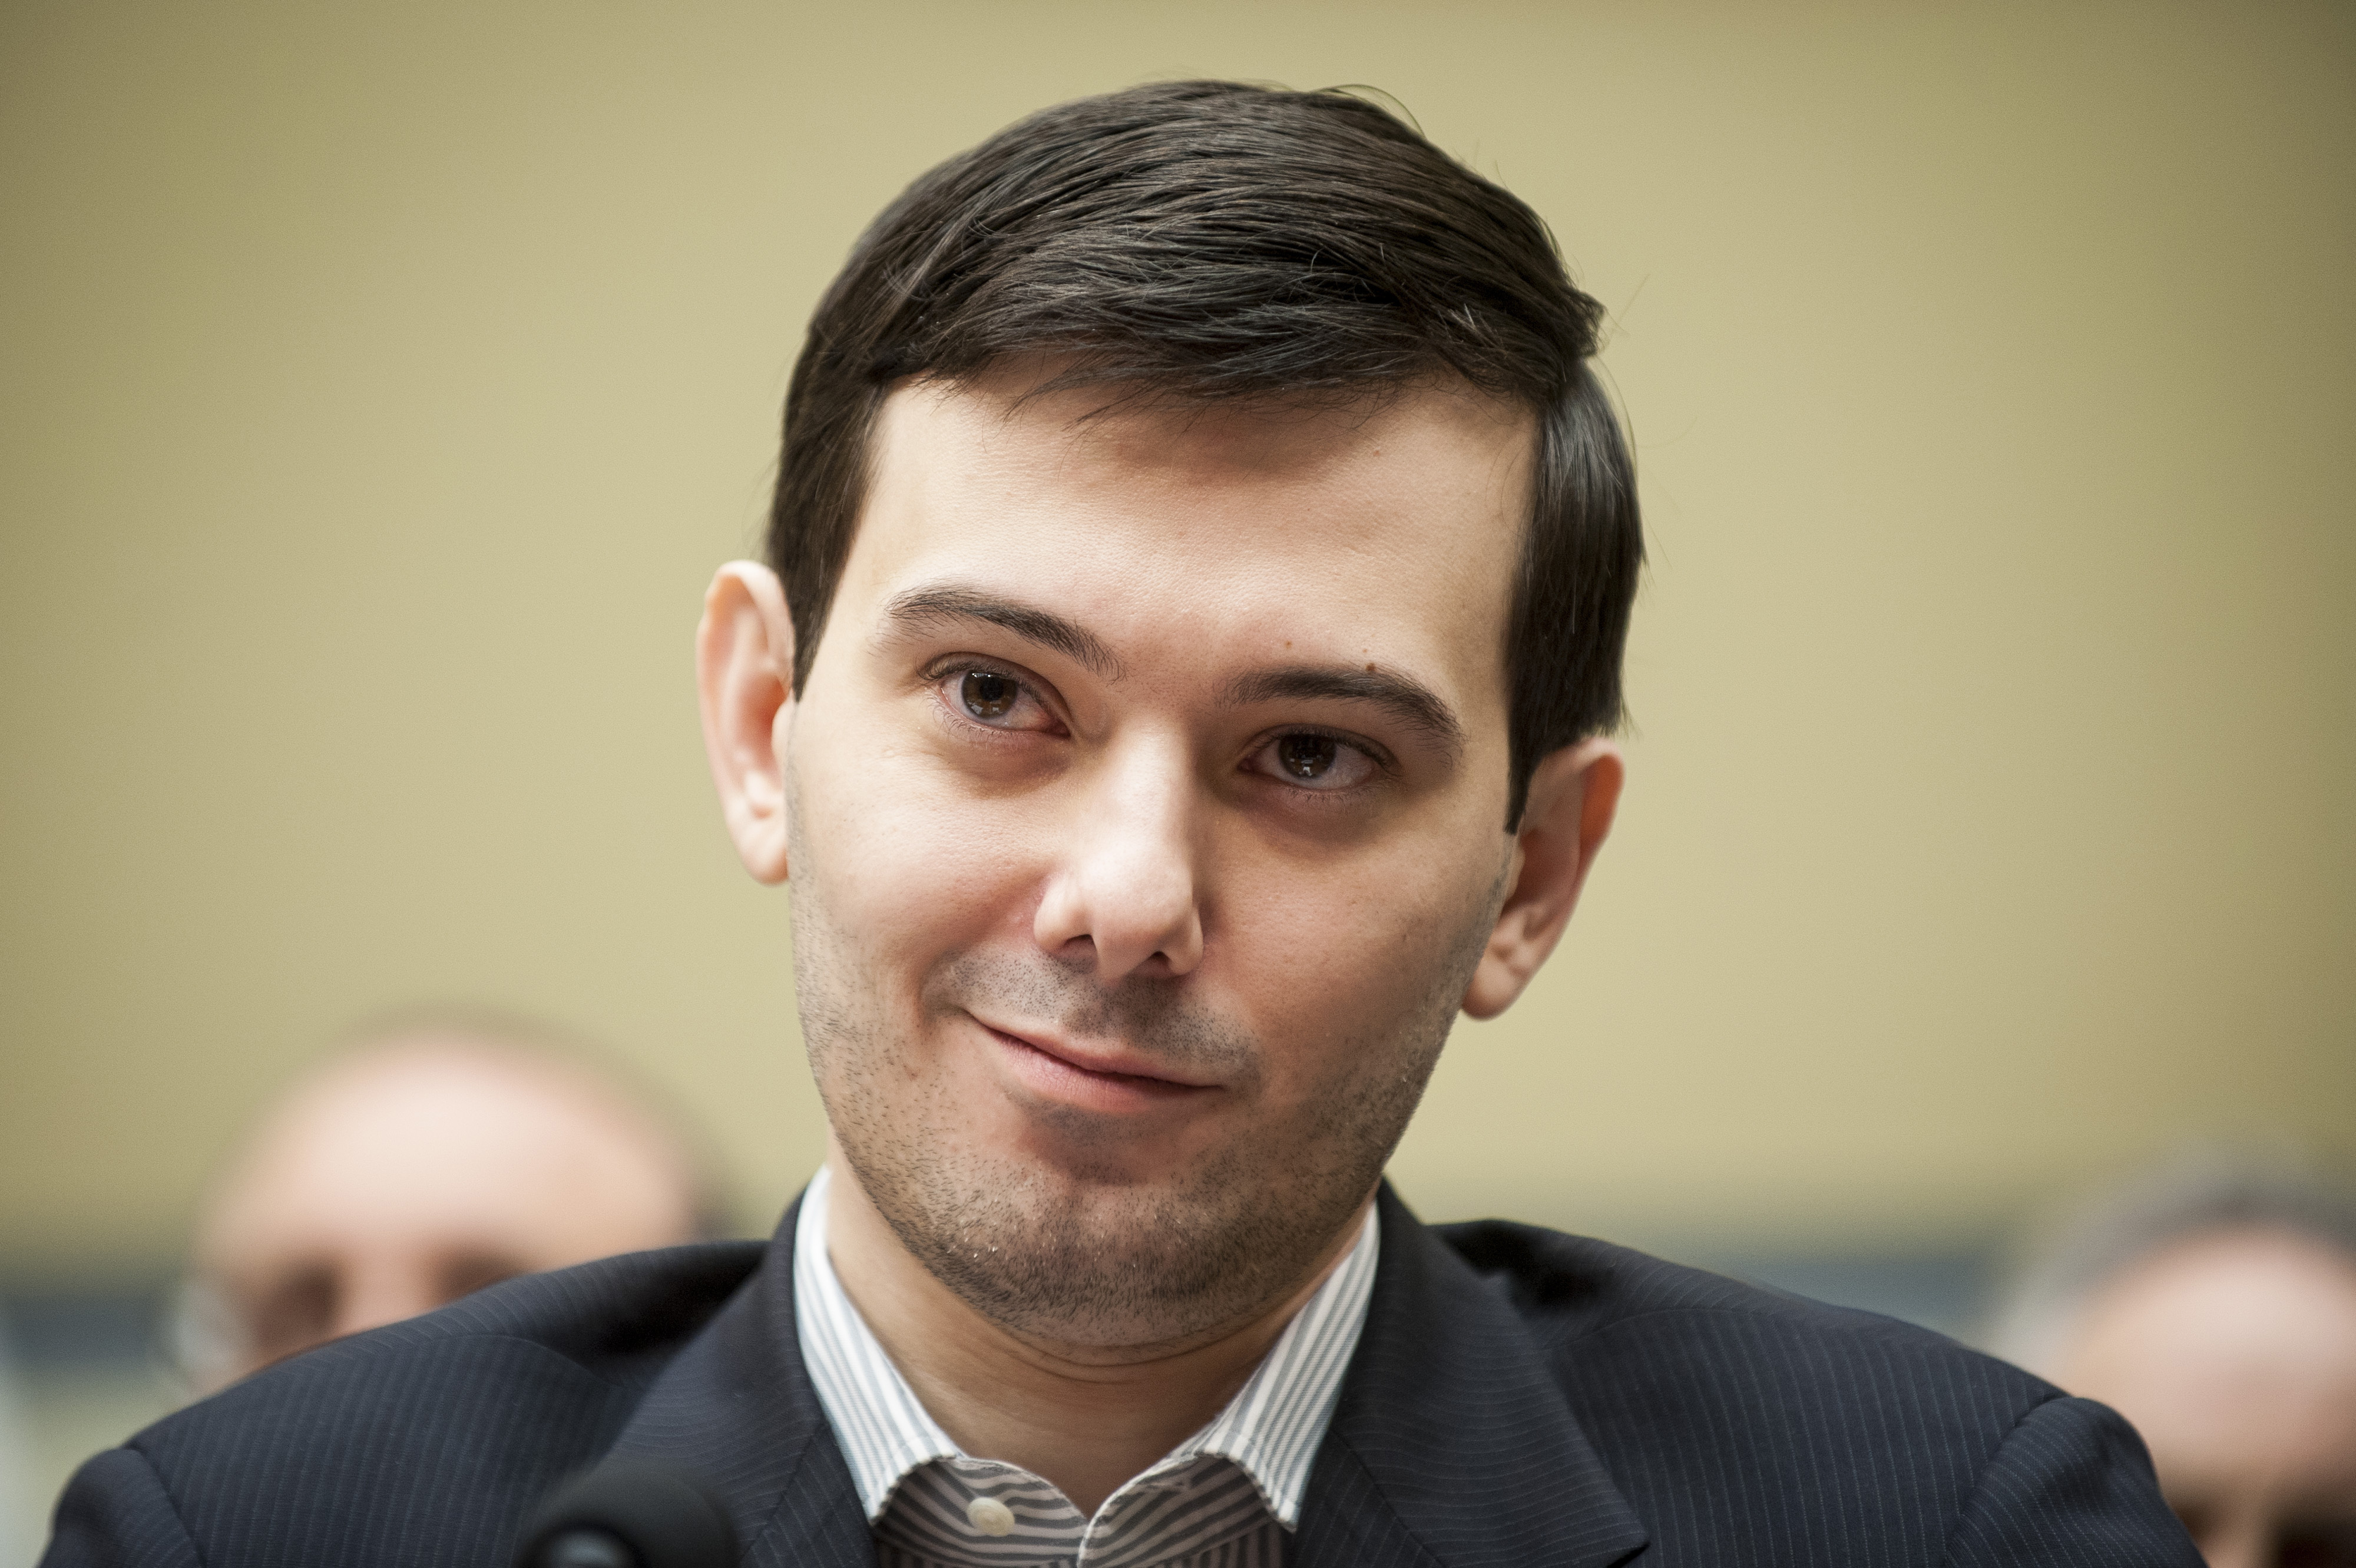 Martin Shkreli, former chief executive officer of Turing Pharmaceuticals LLC, smiles during a House Committee on Oversight and Government Reform hearing on prescription drug prices in Washington, D.C., U.S., on Thursday, Feb. 4, 2016. (Pete Marovich—Bloomberg/Getty Images)